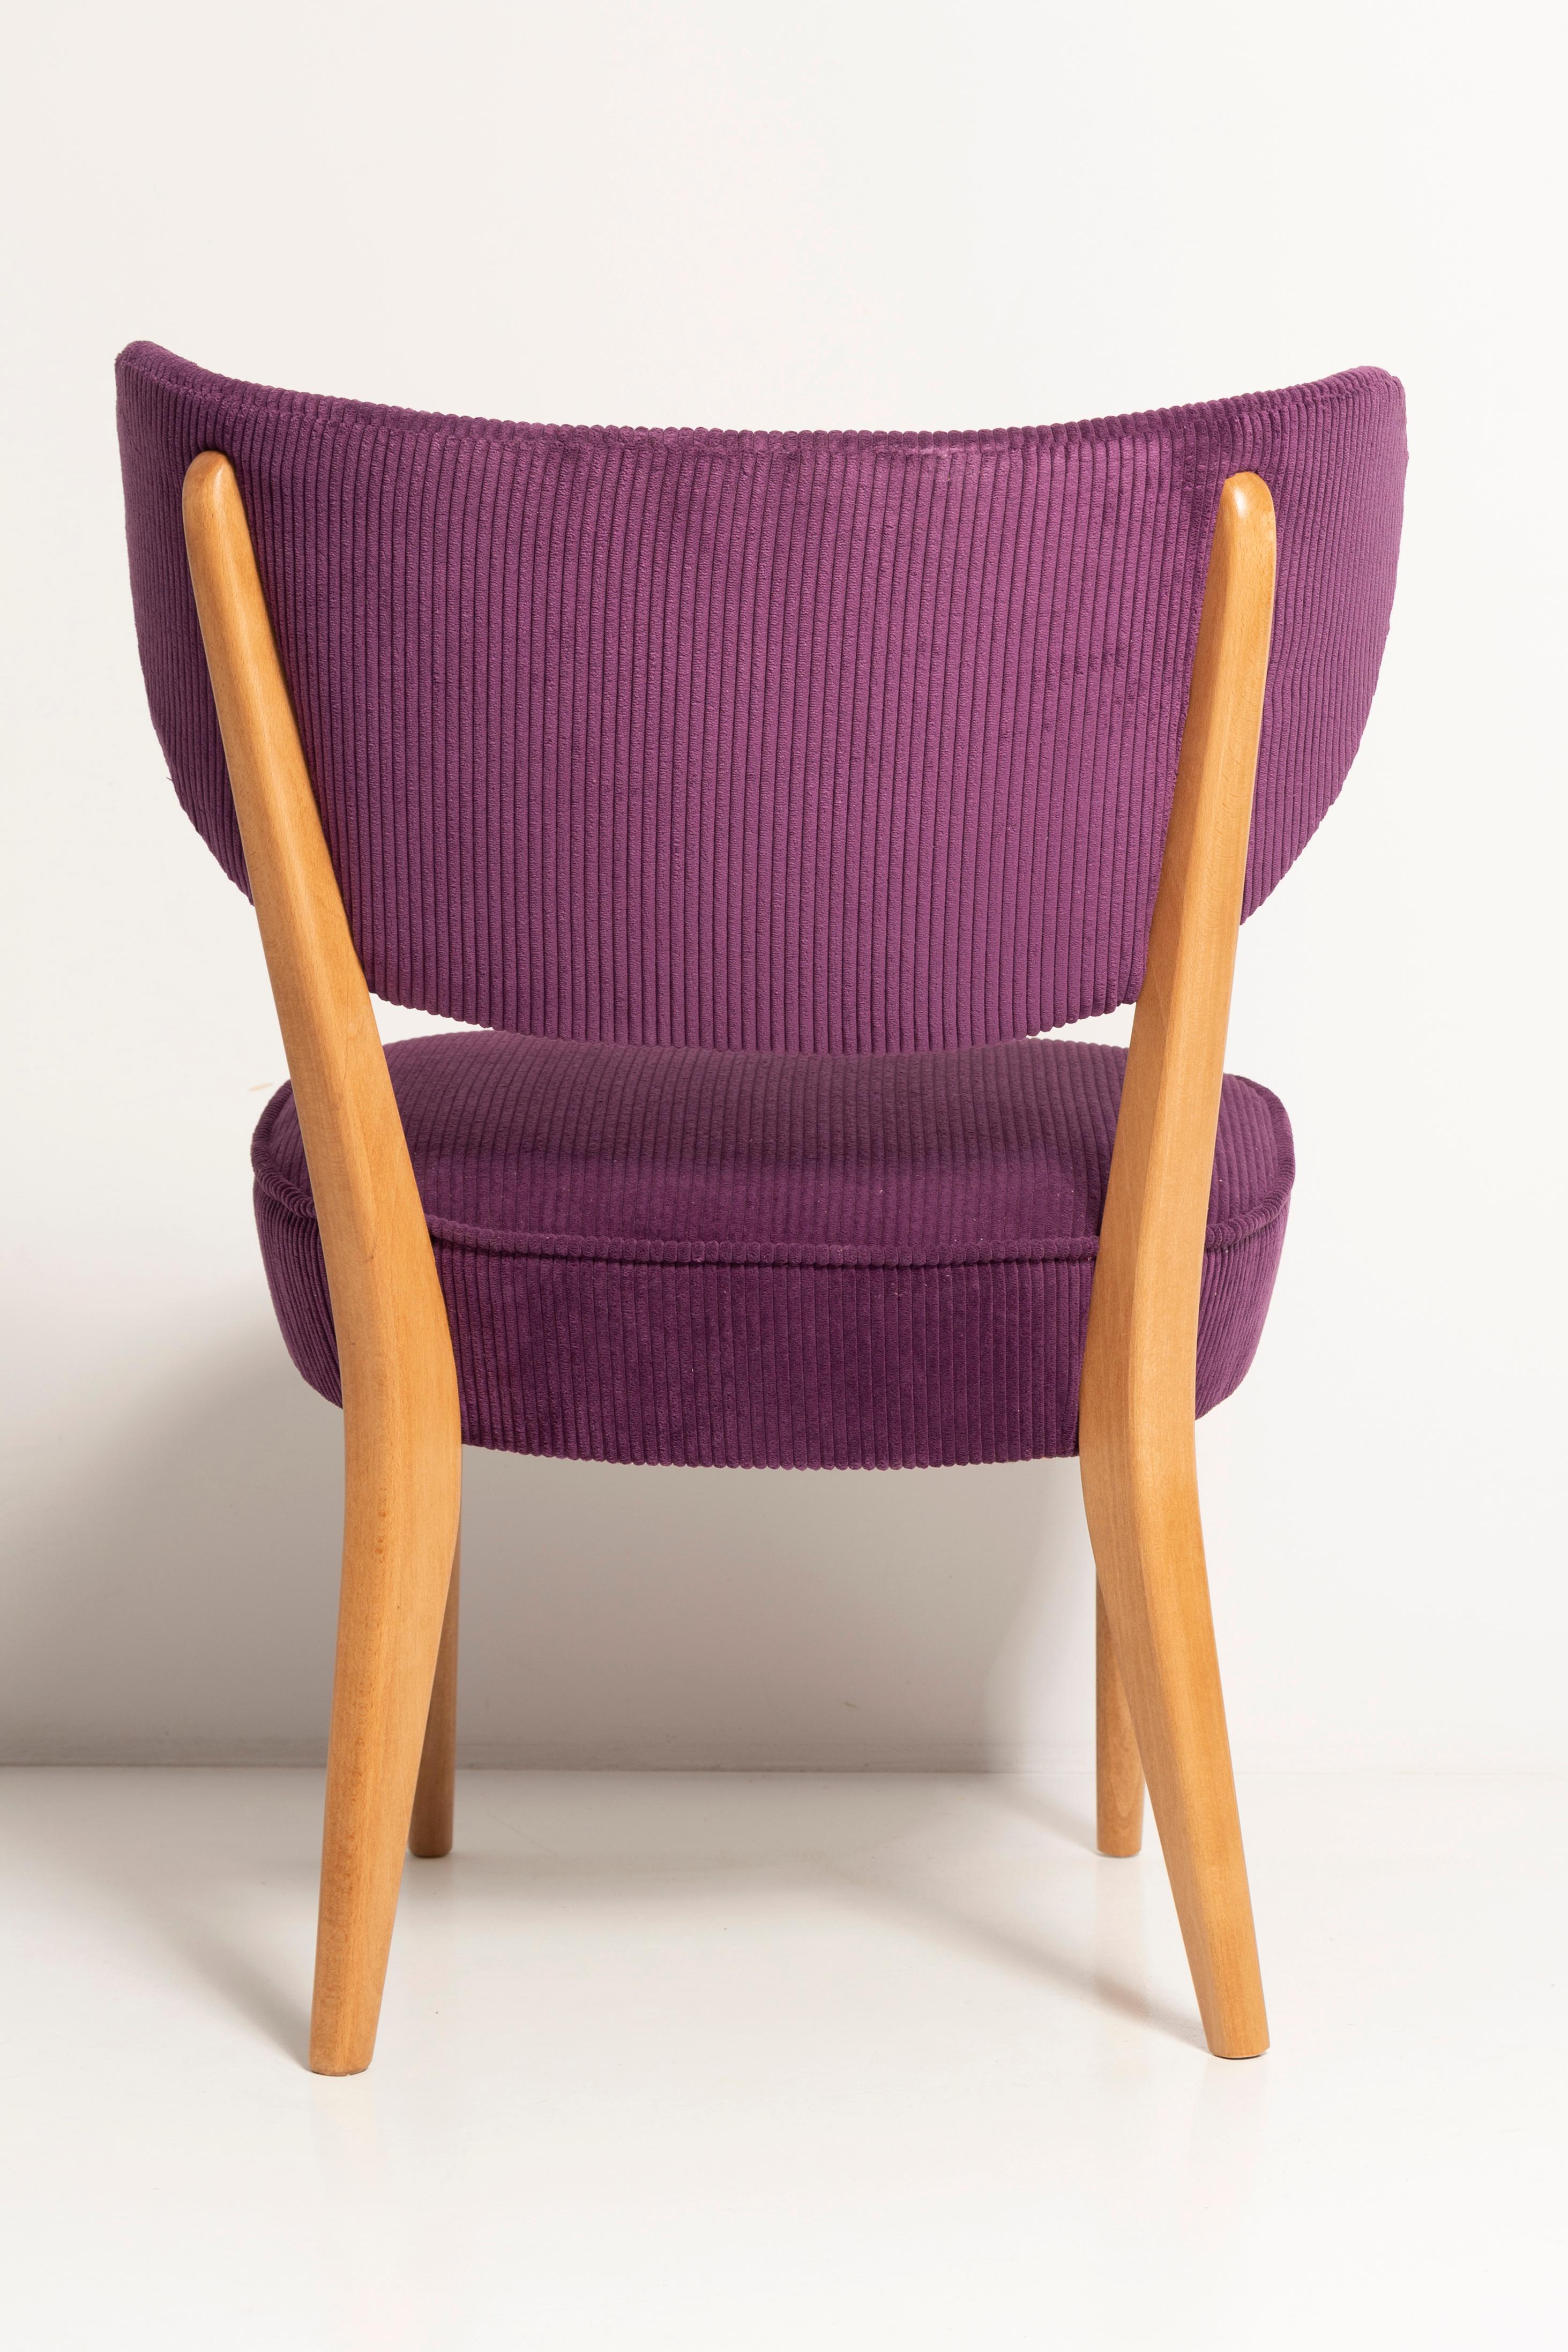 Contemporary Pair of Midcentury Style Violet Velvet Club Chairs, by Vintola Studio, Europe For Sale